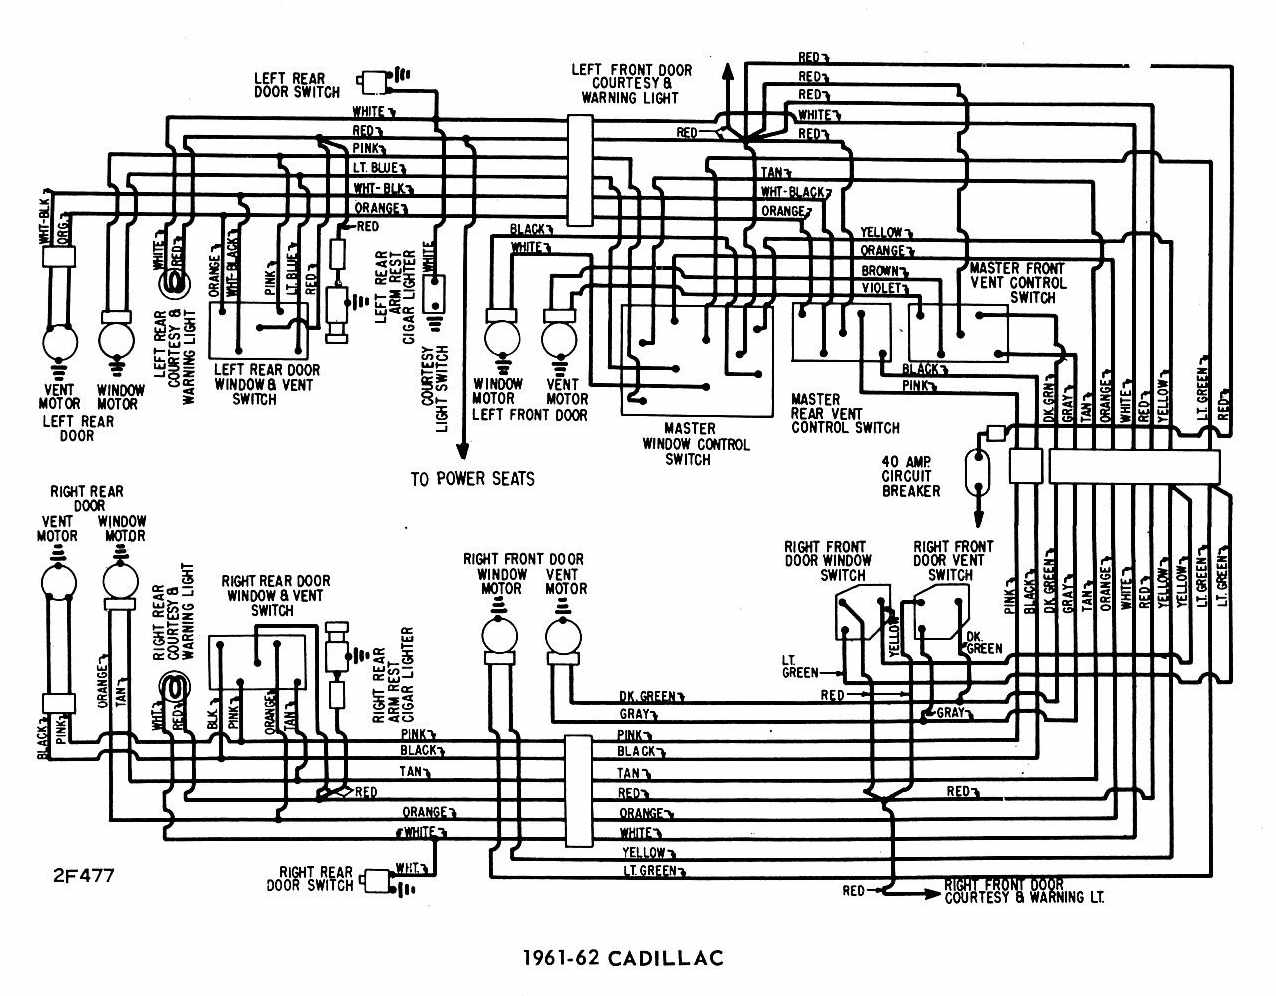 2003 Cadillac Cts Fuel Injector Wiring Diagram from www.automotive-manuals.net